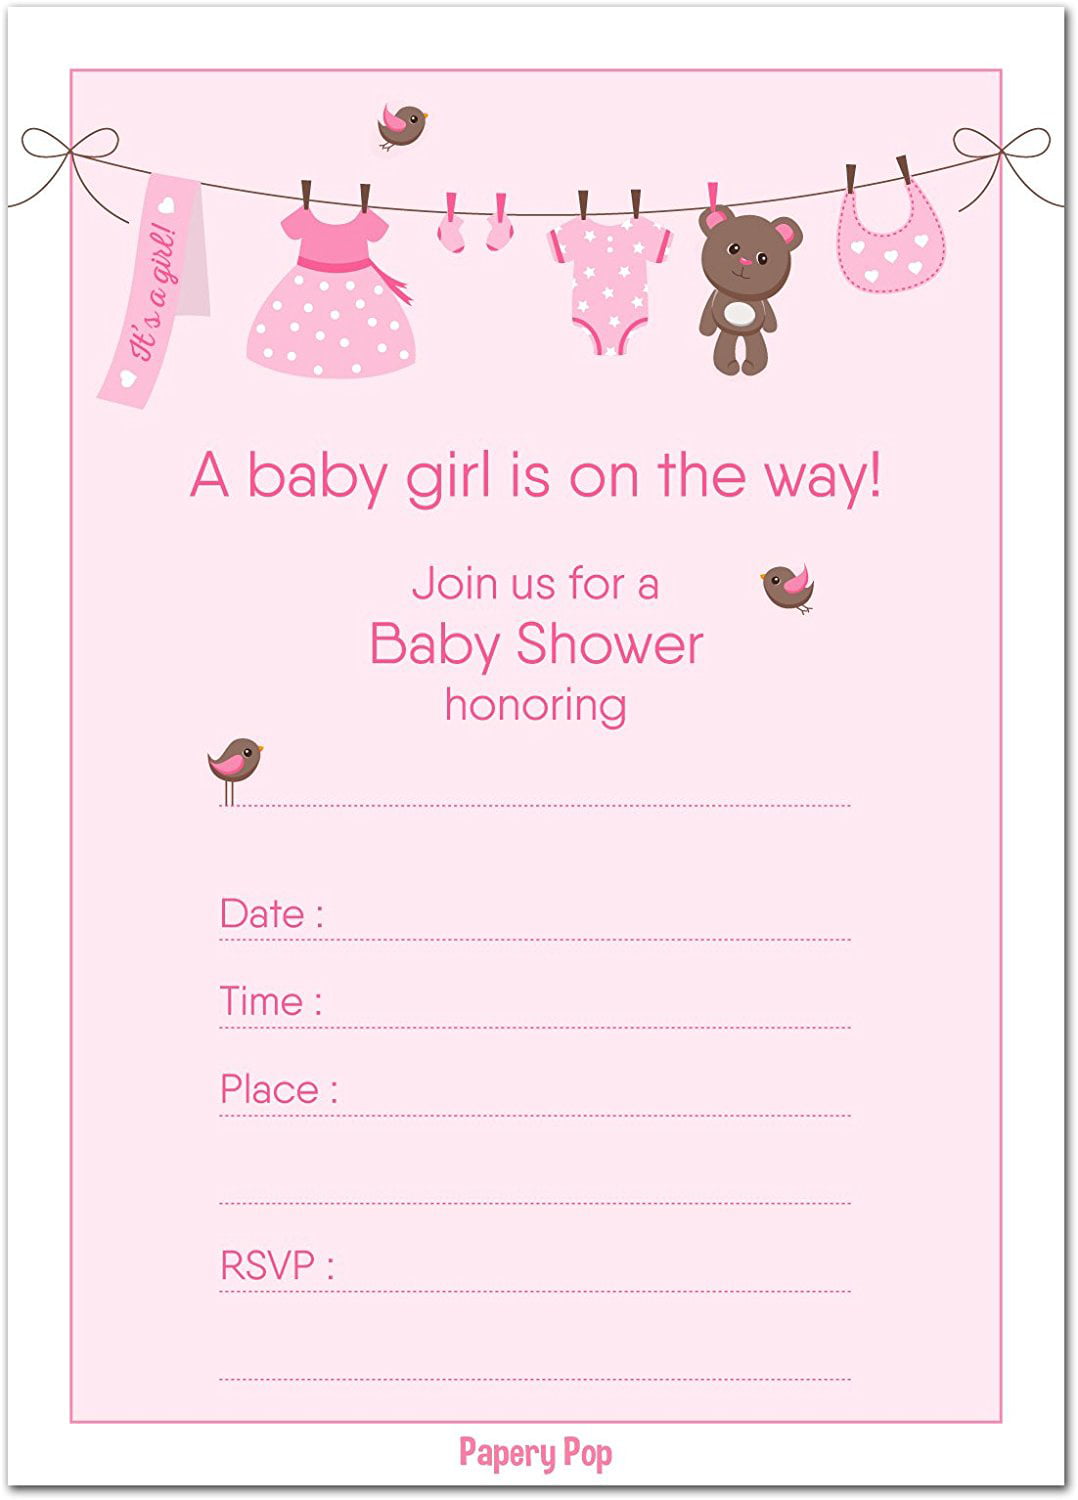 Baby Girl Teddy Bear Baby Shower Invitation Cards with Envelopes Set of 12 Shaped Fill-in Invitations 